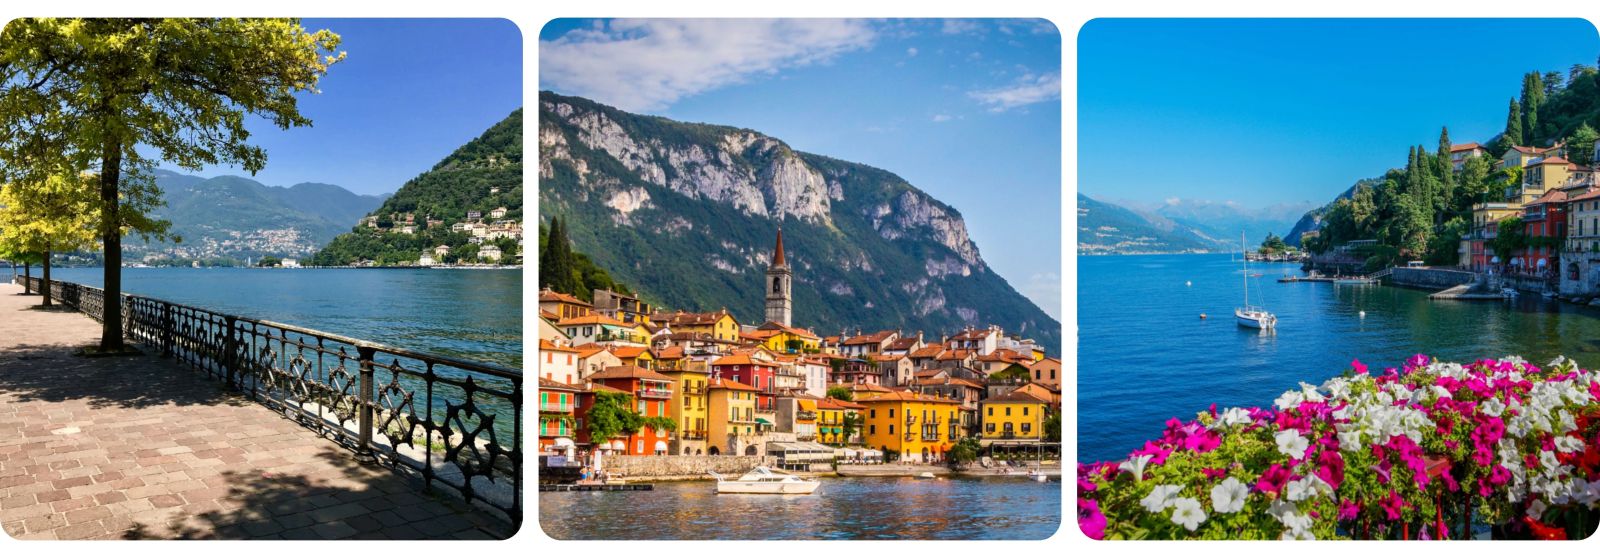 Northern Italy by train - Lake Como